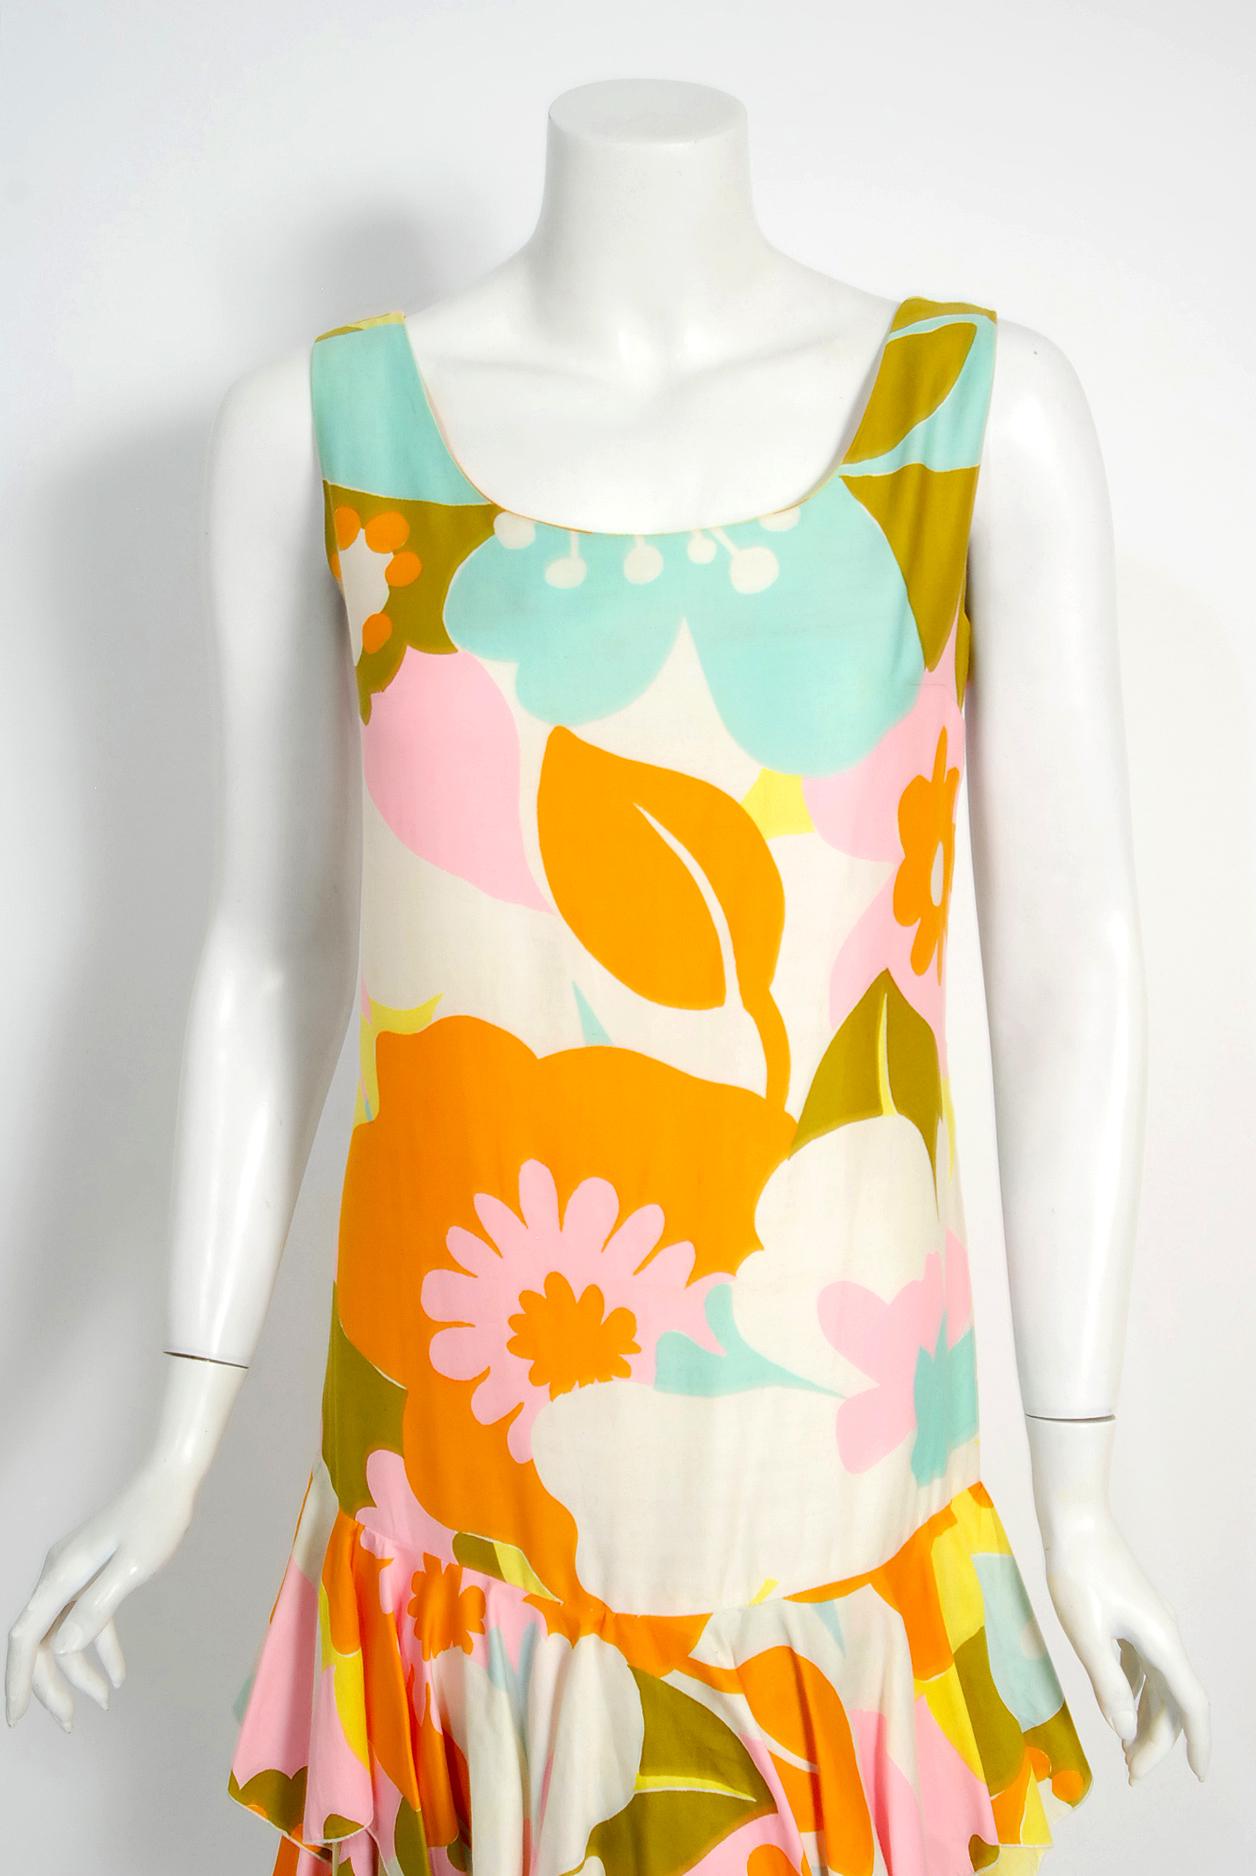 Truly a wonderful and unusual designer sundress from Sara's Las Vegas boutique. I think this is one of the best examples of 1960's flower power fashion I have seen in a long time. The design was obviously inspired by Pierre Cardin who was a leader